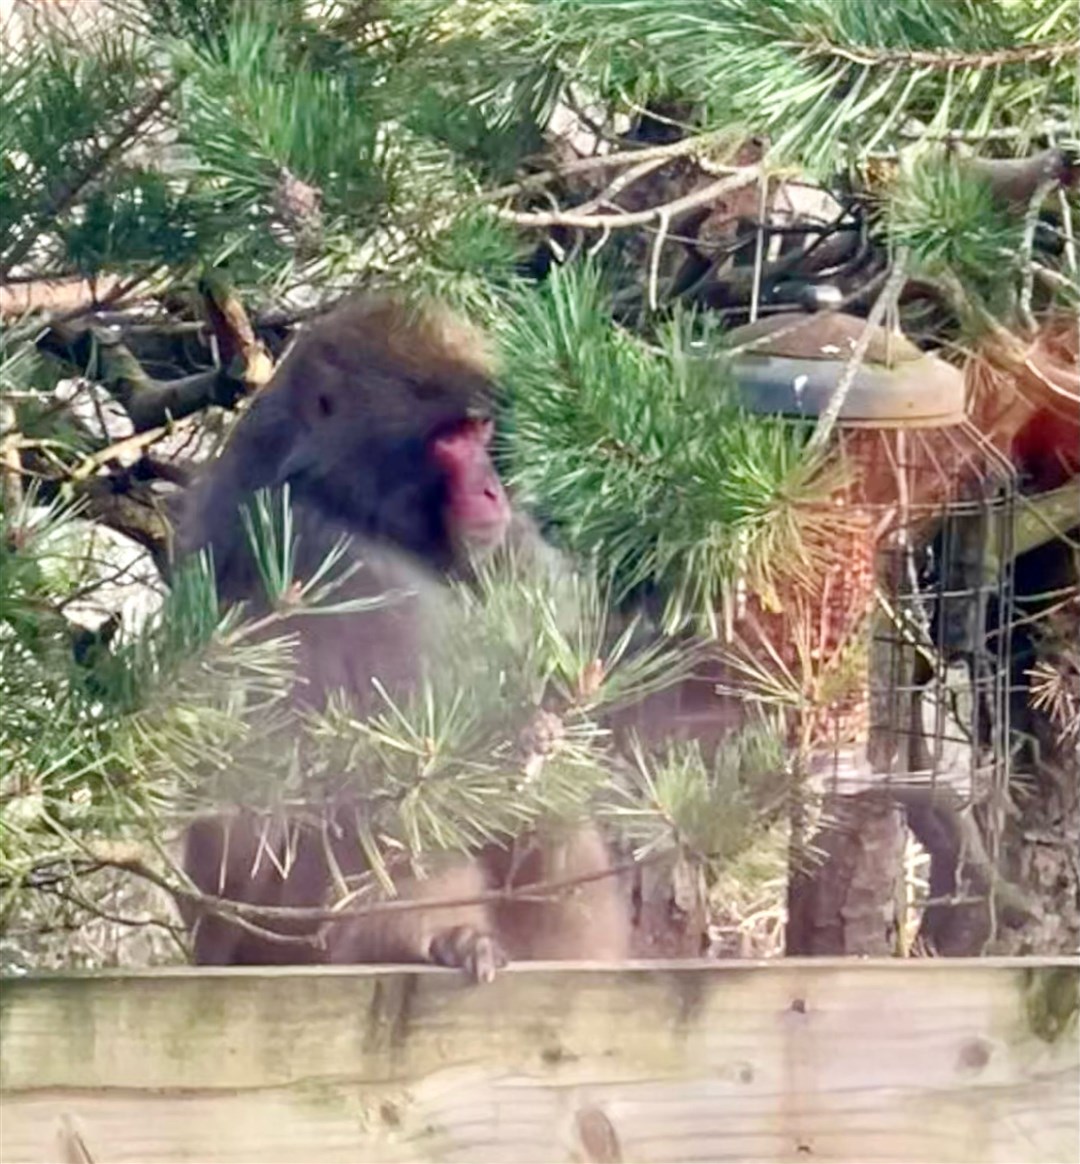 The monkey feels peckish and attempts to use the birdfeeder at the Nagels' place in Kincraig. Picture Carl Nagel.